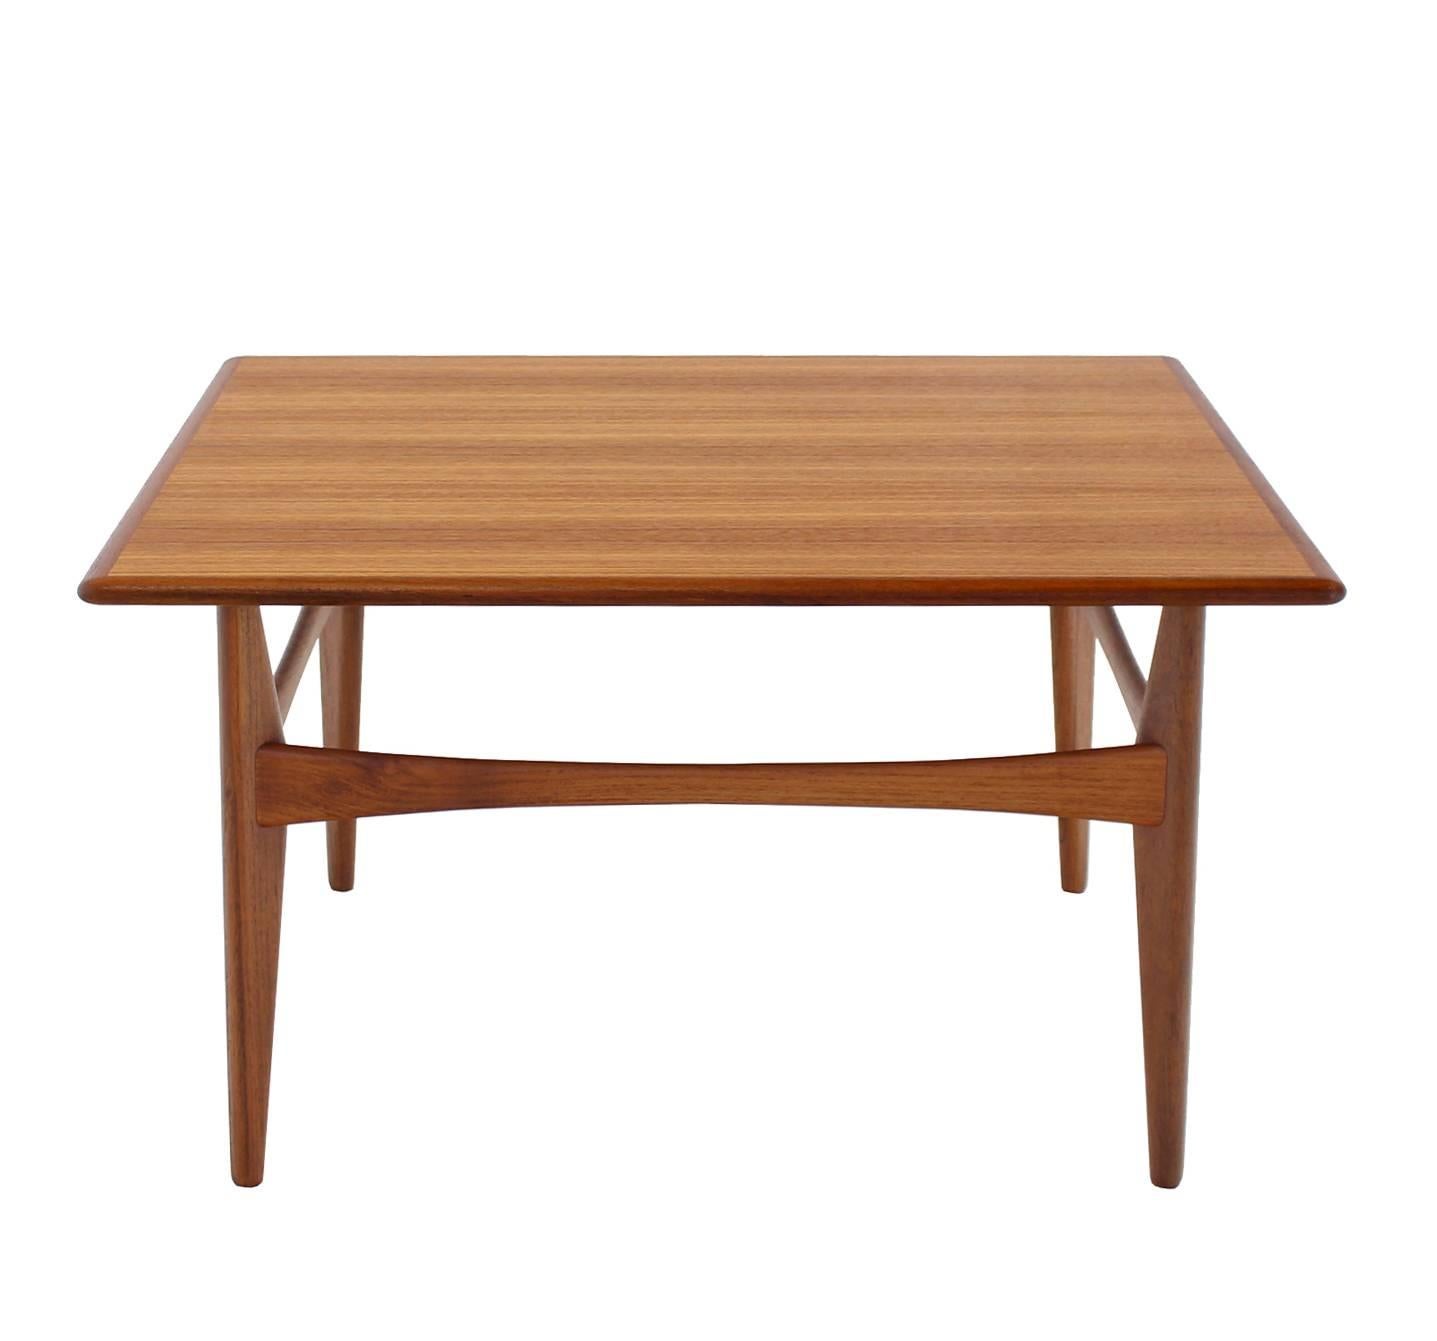 Made in Sweden Danish modern style square teak coffee table.